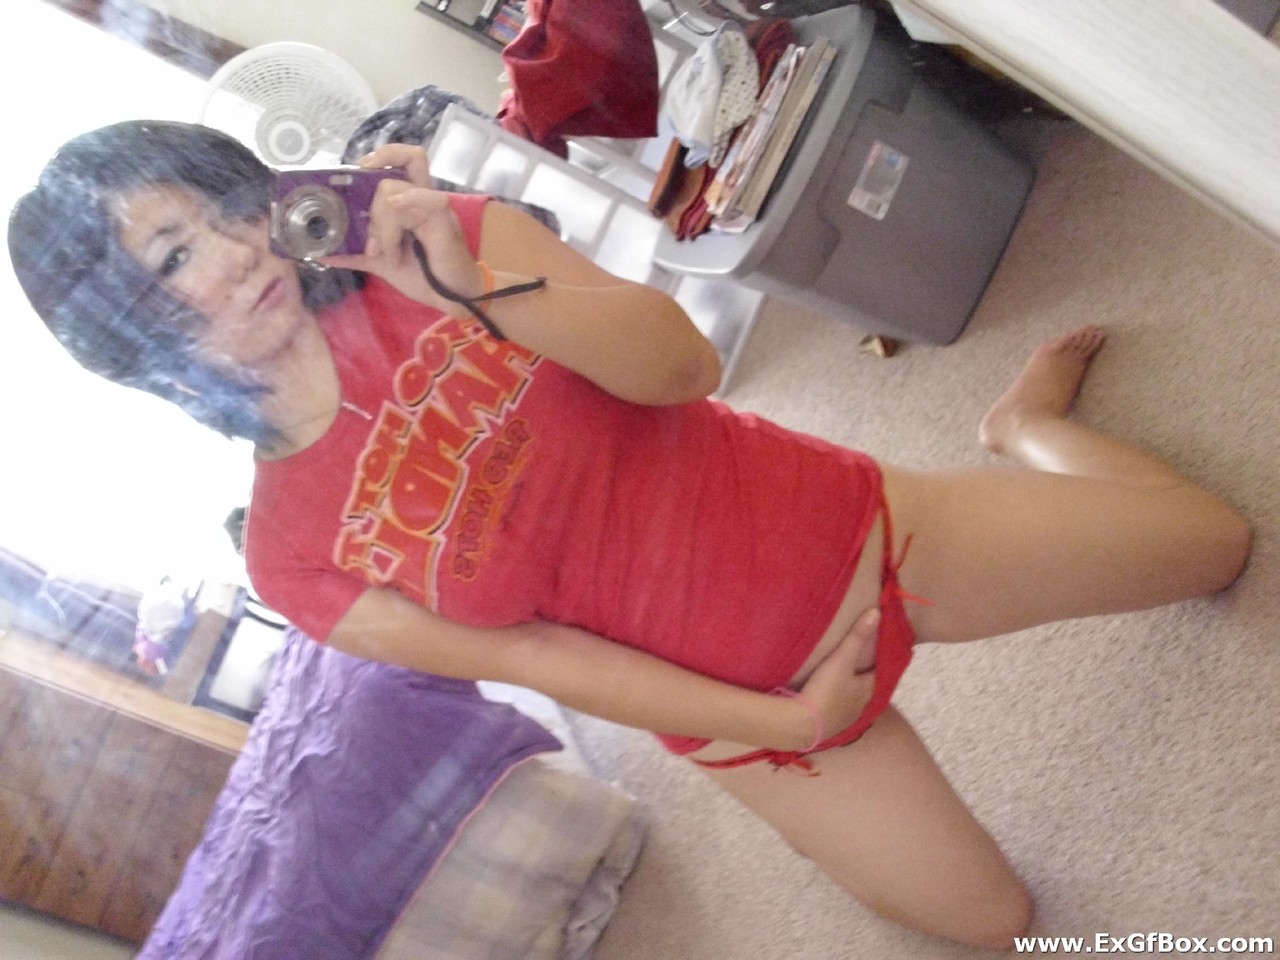 Bootylicious teenage girlfriend takes selfies of her hot body while stripping porn photo #426010454 | Ex GF Box Pics, Selfie, mobile porn